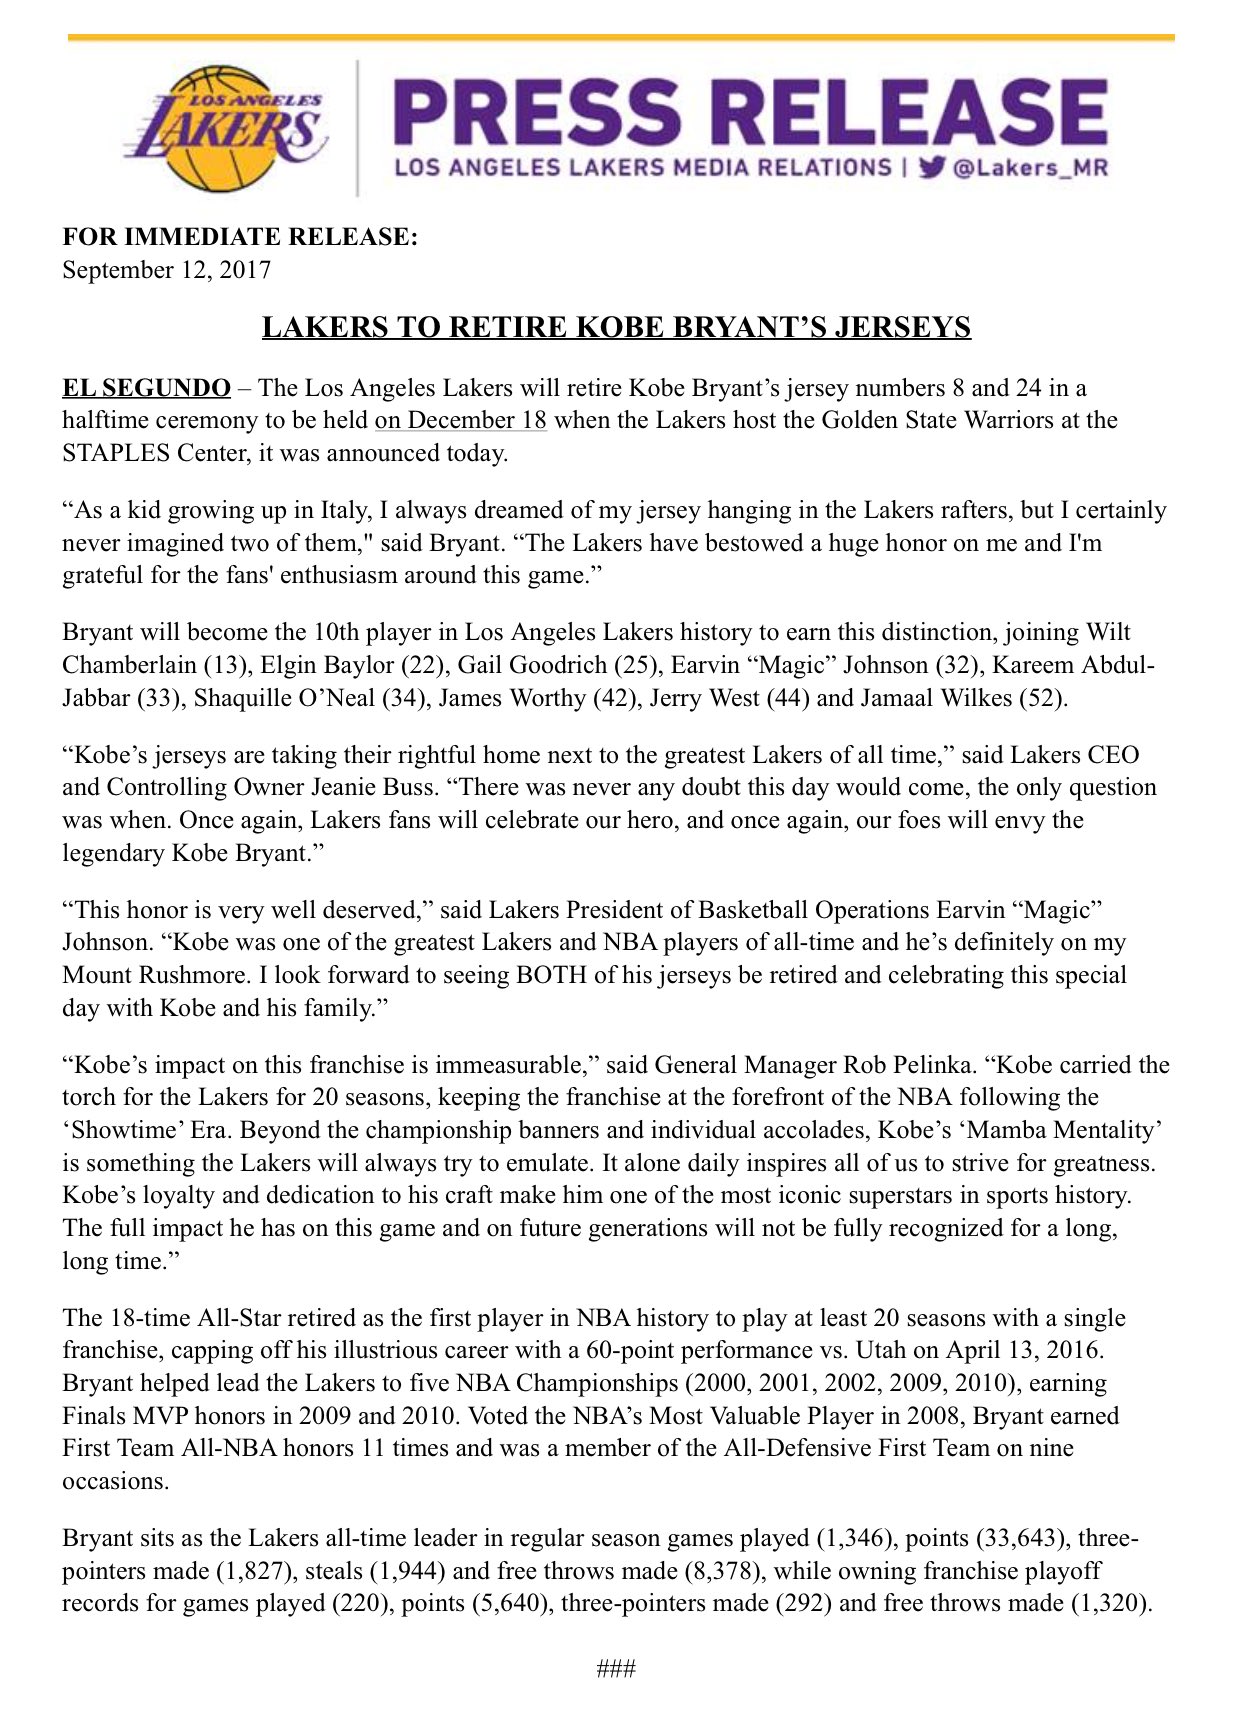 Lakers to retire Kobe Bryant's number 8 & 24 jerseys 